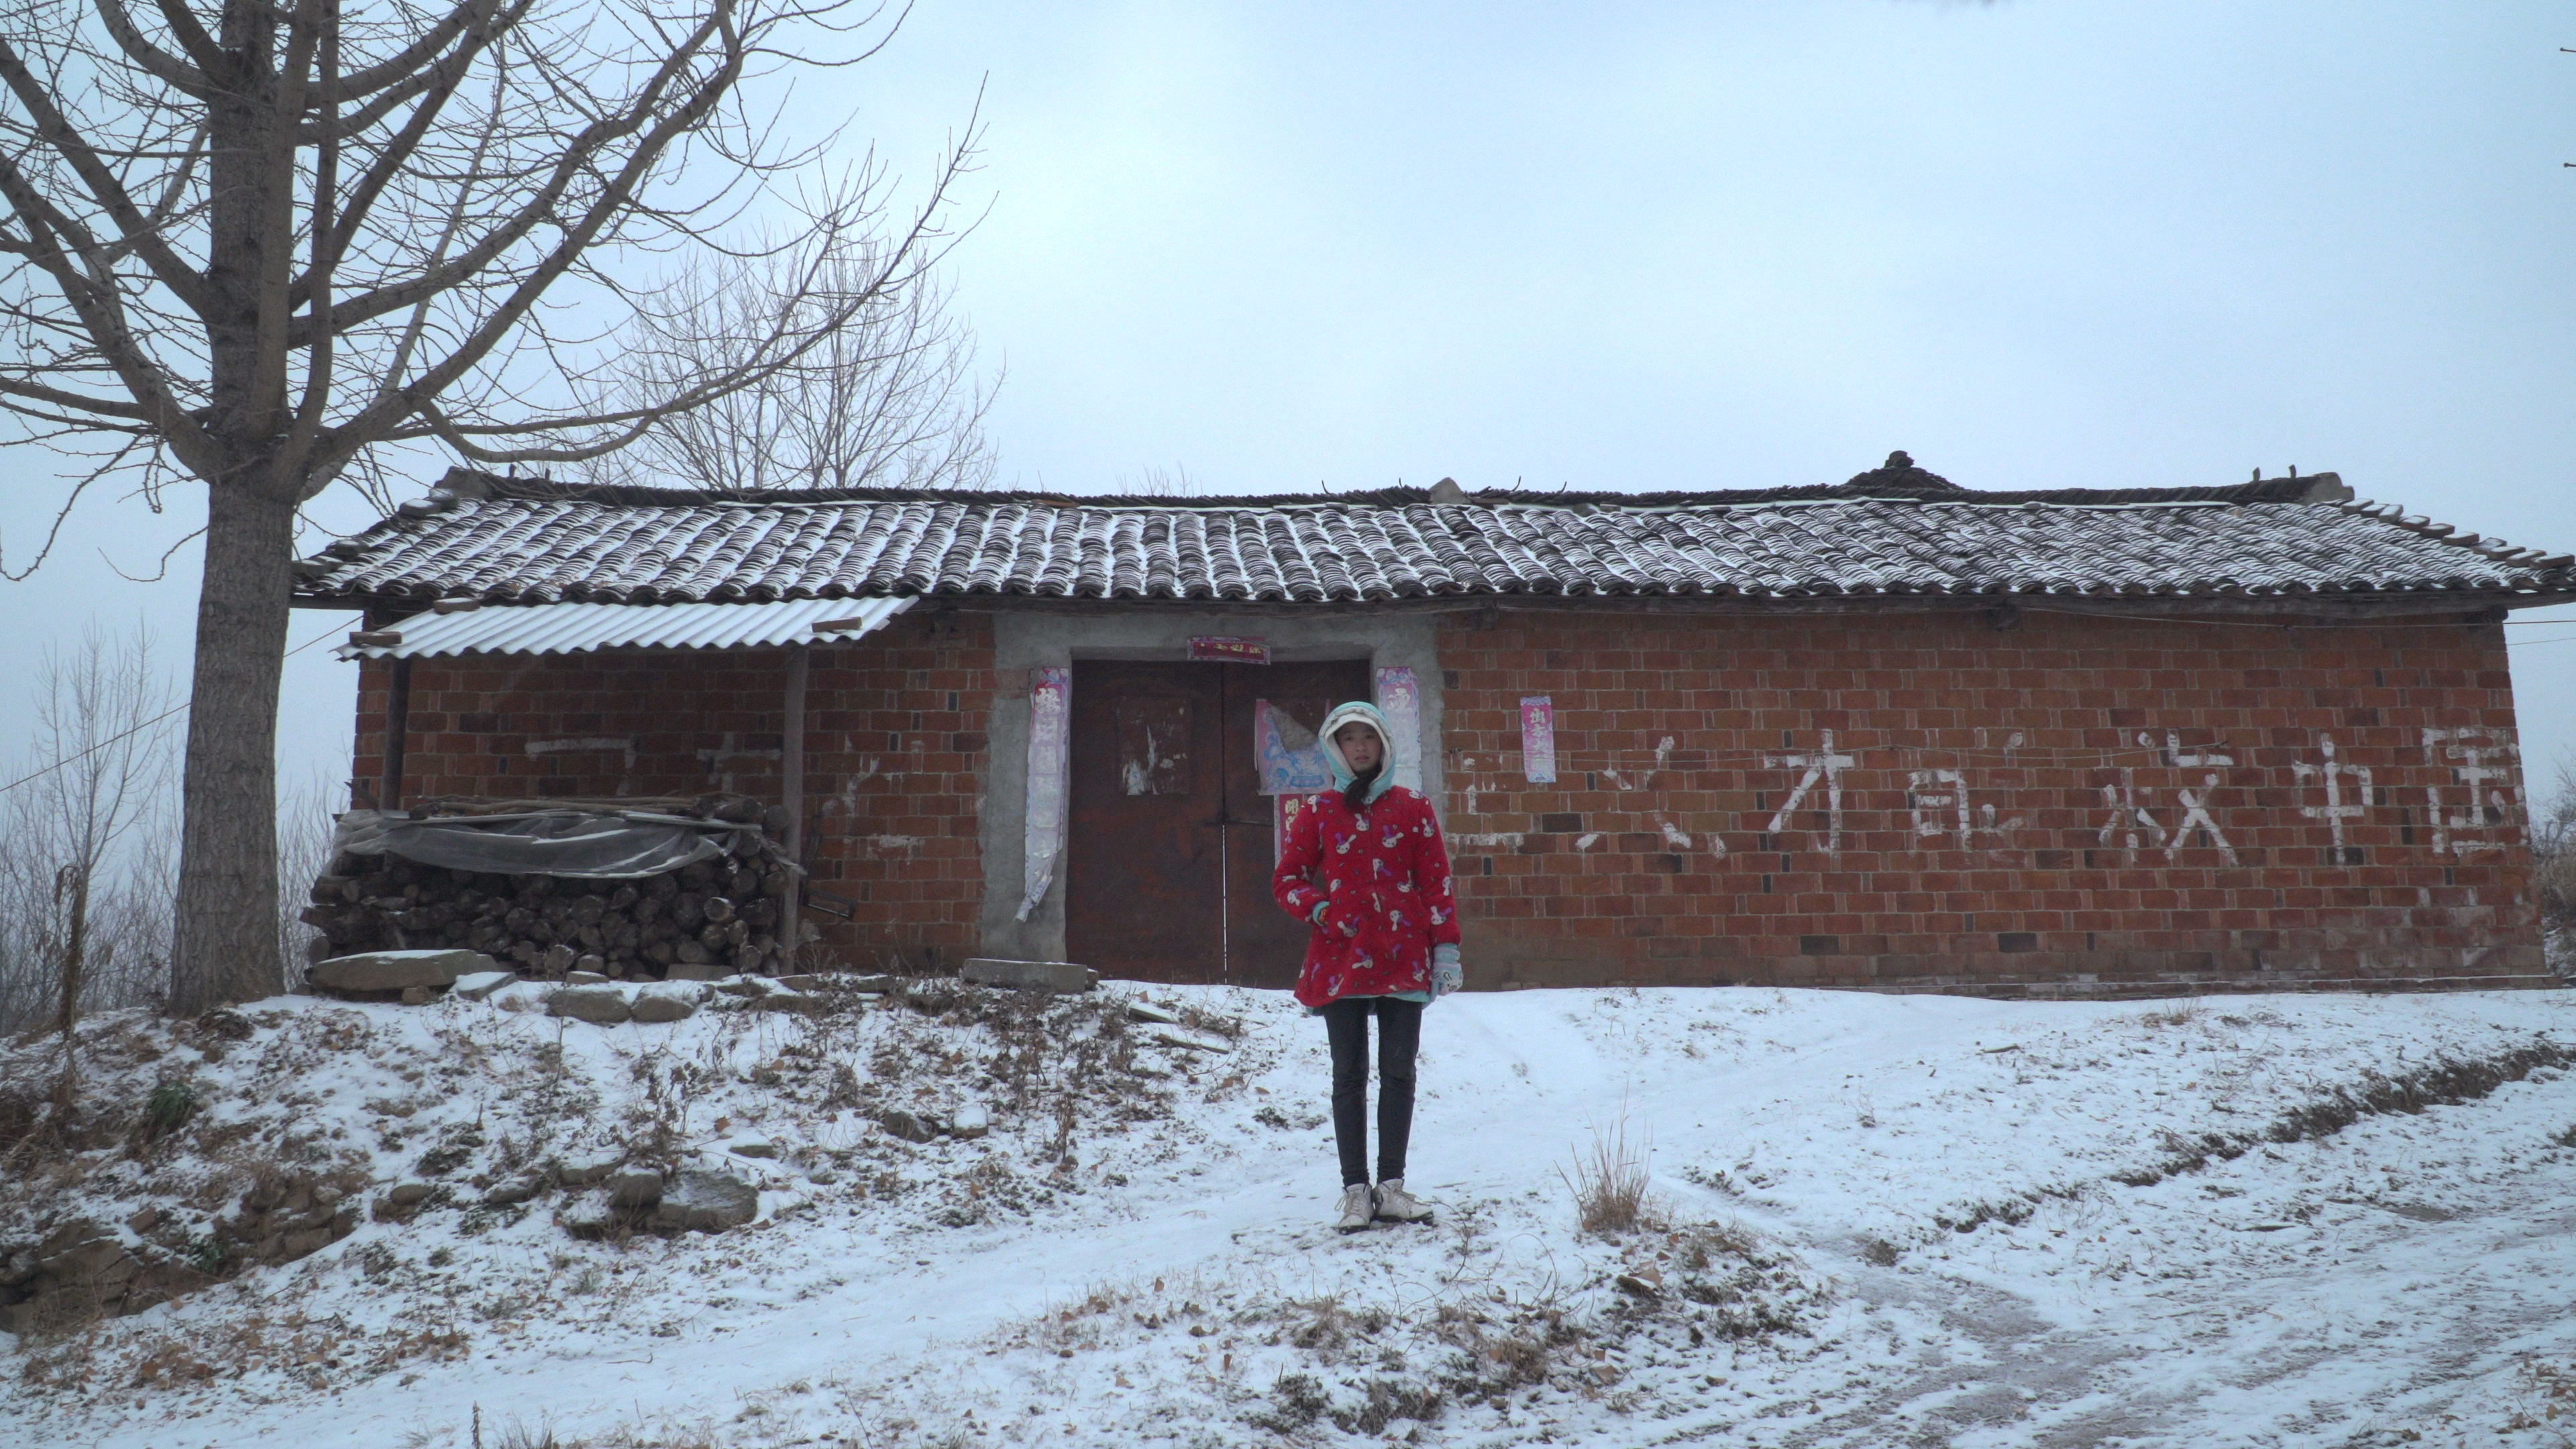 A young girl in a red coat stands in front of a brick building in the middle of winter.